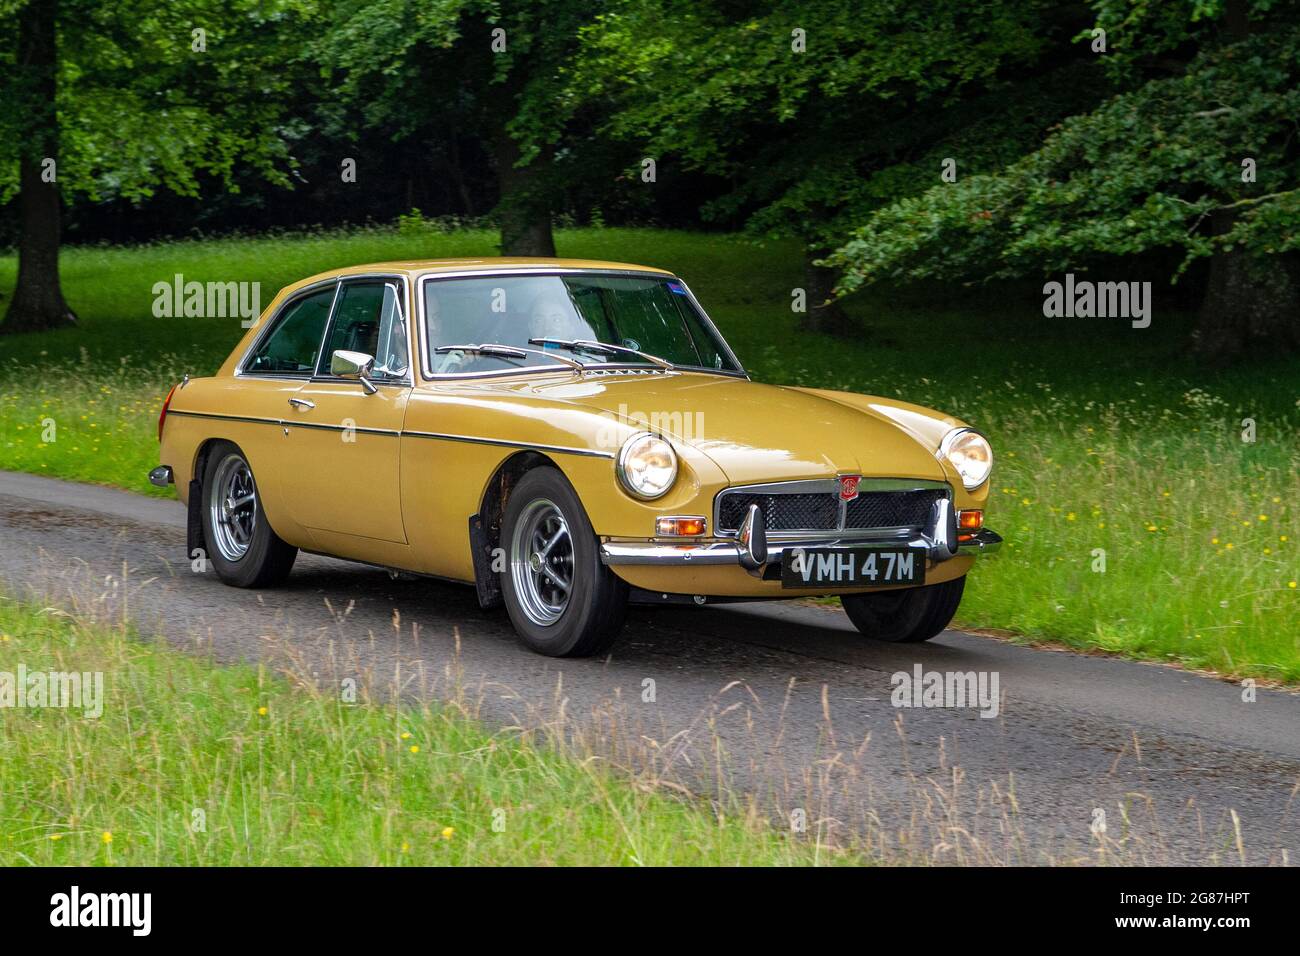 1974 70s,1970s gold British MG BGT at ‘The Cars the Star Show” in Holker Hall & Gardens, Grange-over-Sands, UK Stock Photo